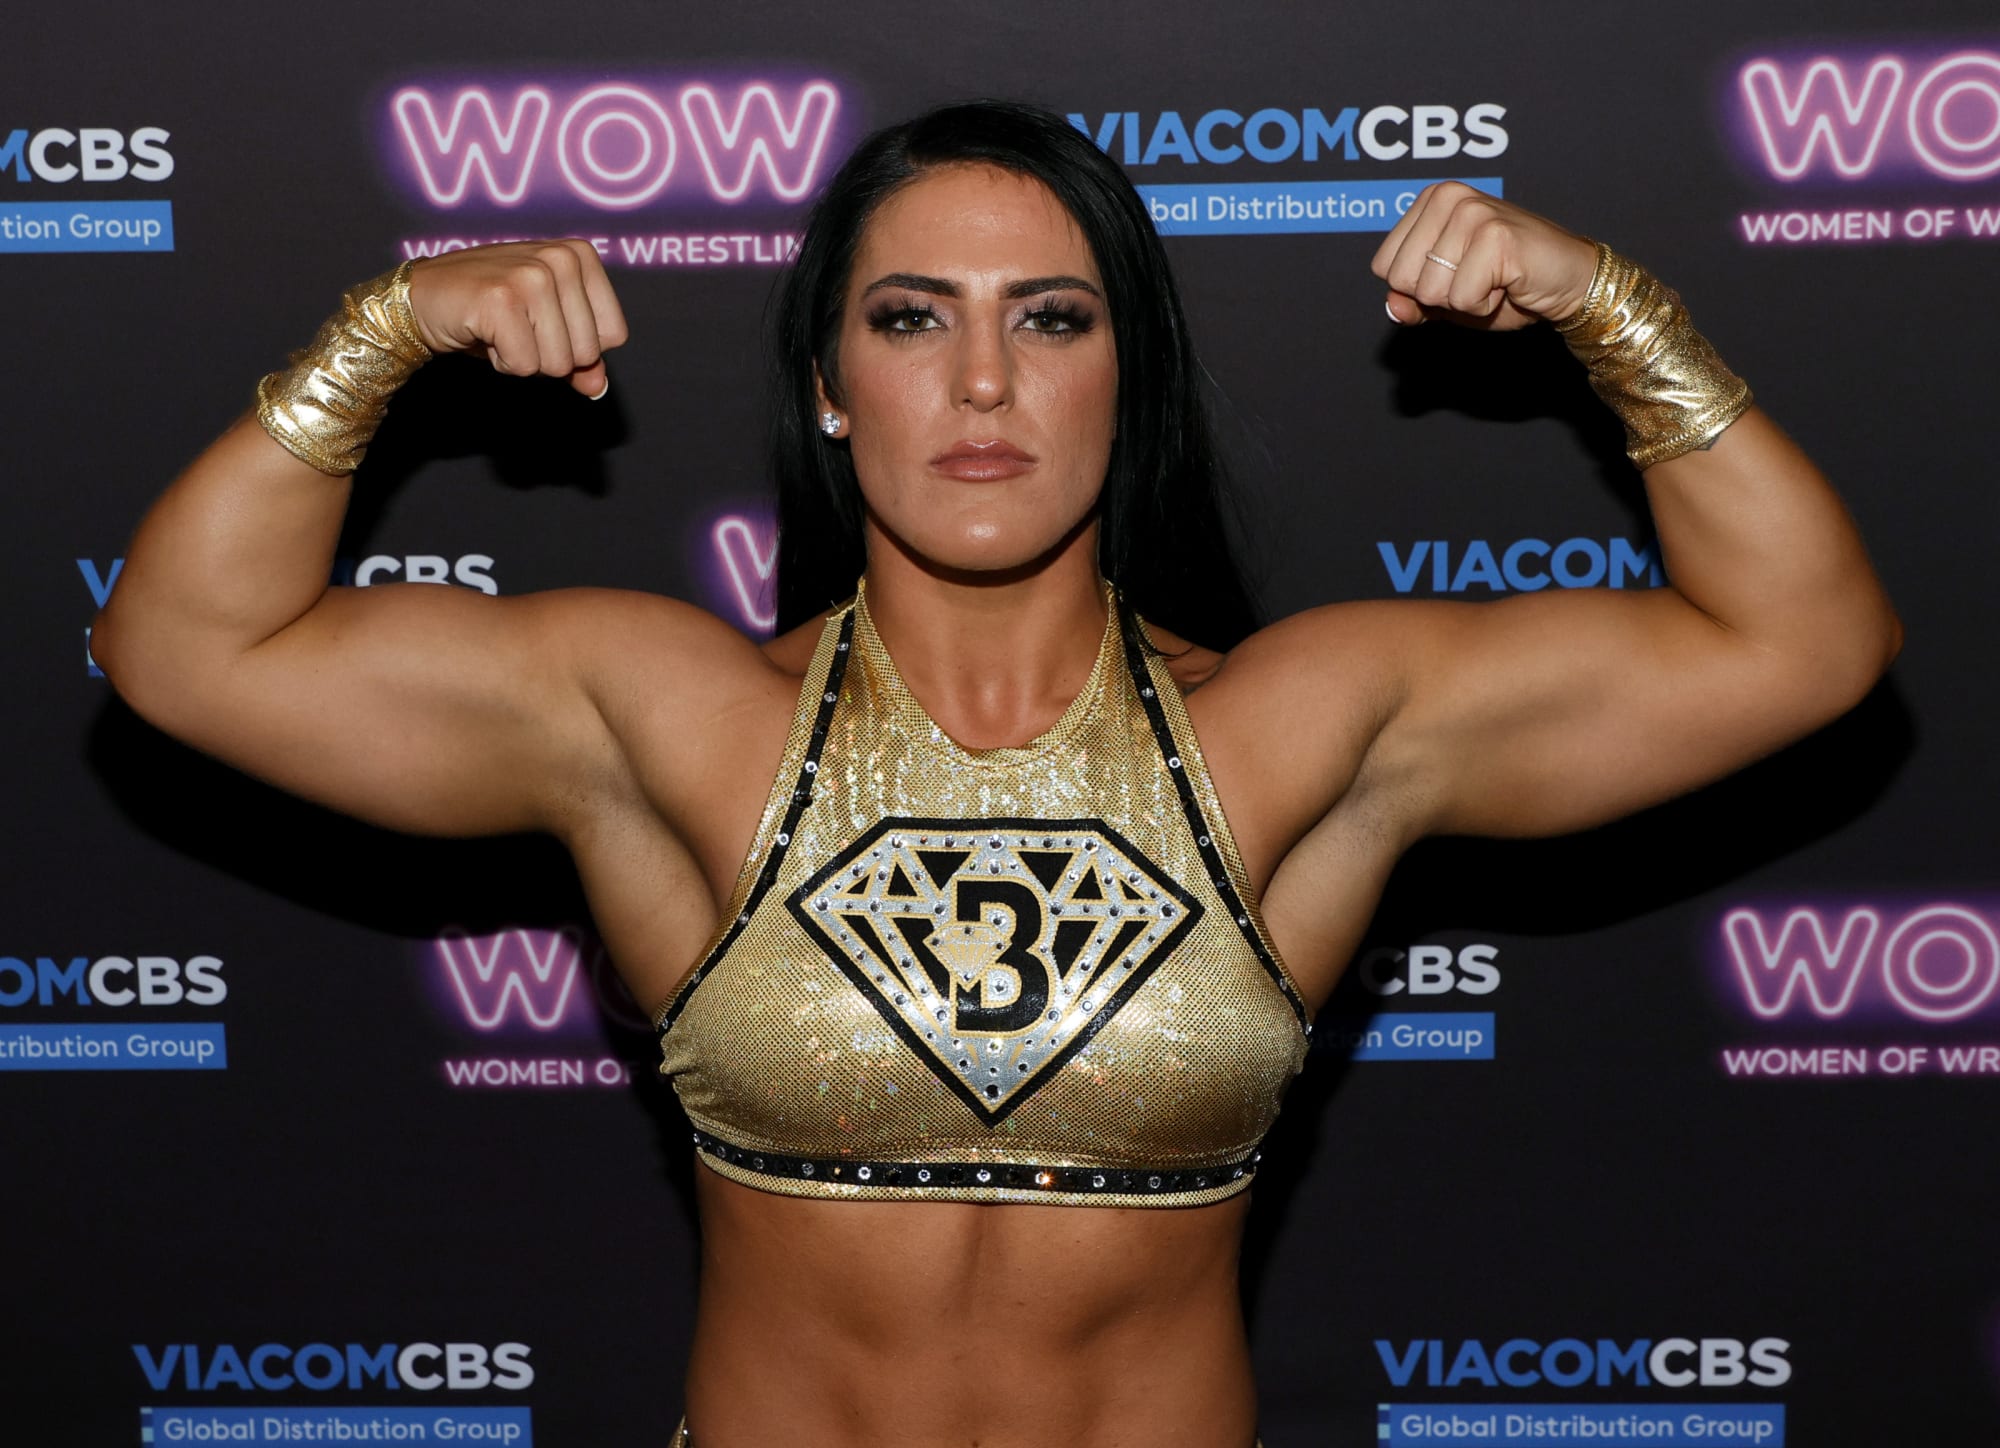 Tessa Blanchard Should Not Get Any More Opportunities In Wrestling